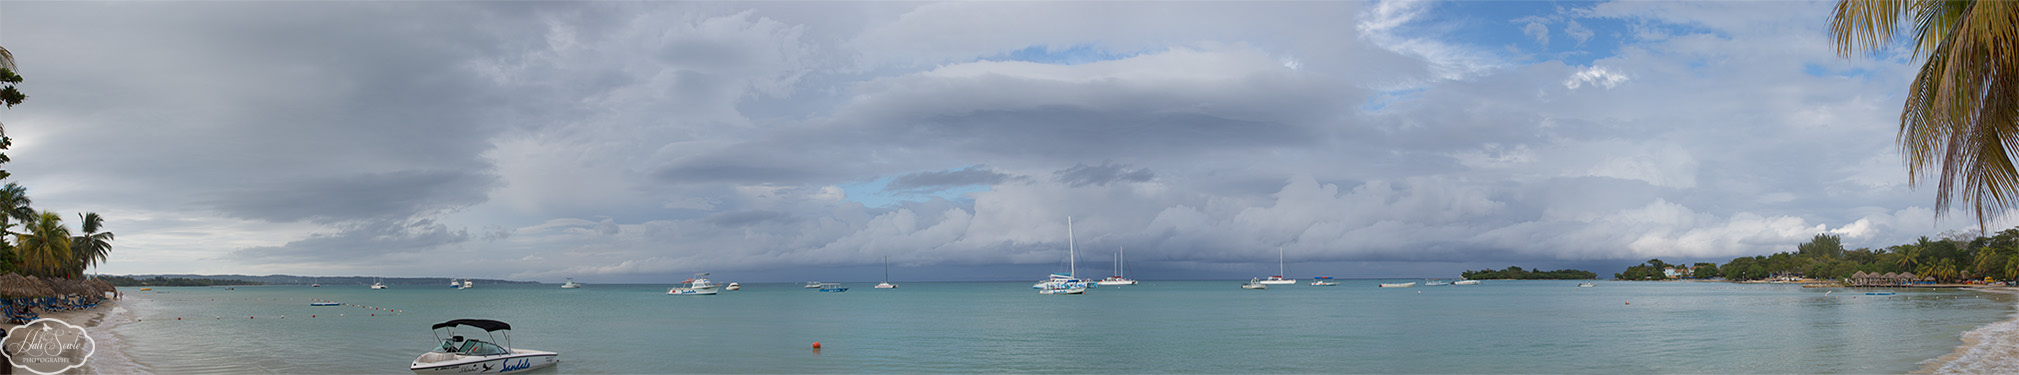 2014_01_SandalsNegril-11148-Edit1000.jpg - The view from the beach looking west the morning we left.  The storm clouds were just beginning to clear out.